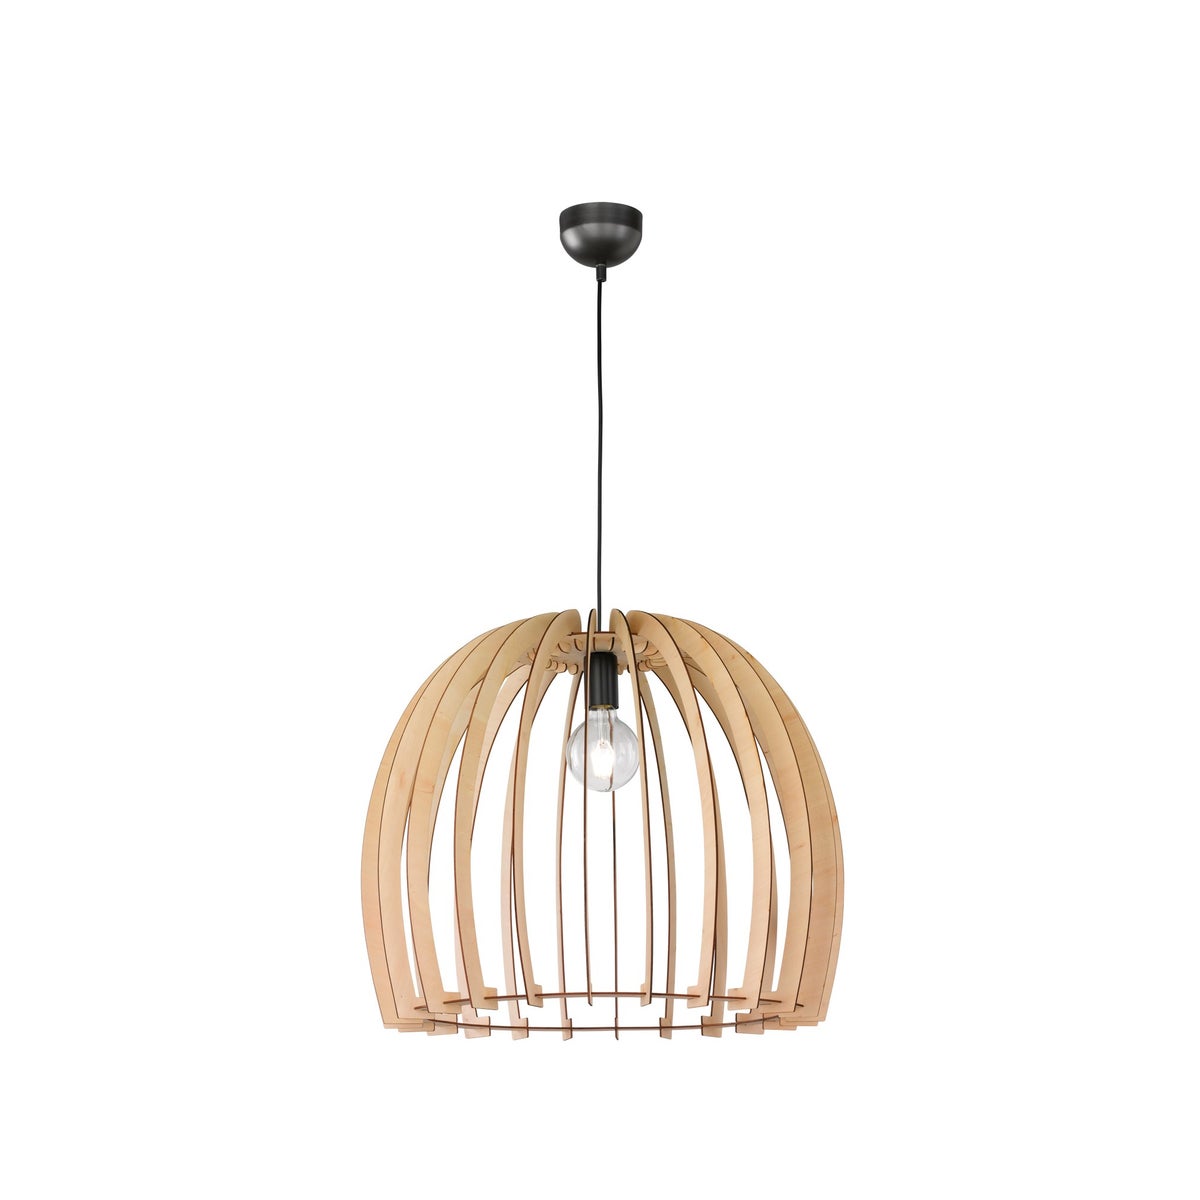 Wood Large Pendant with Dome Shade in Wood Color - deals | ArnsbergerLicht  Inc